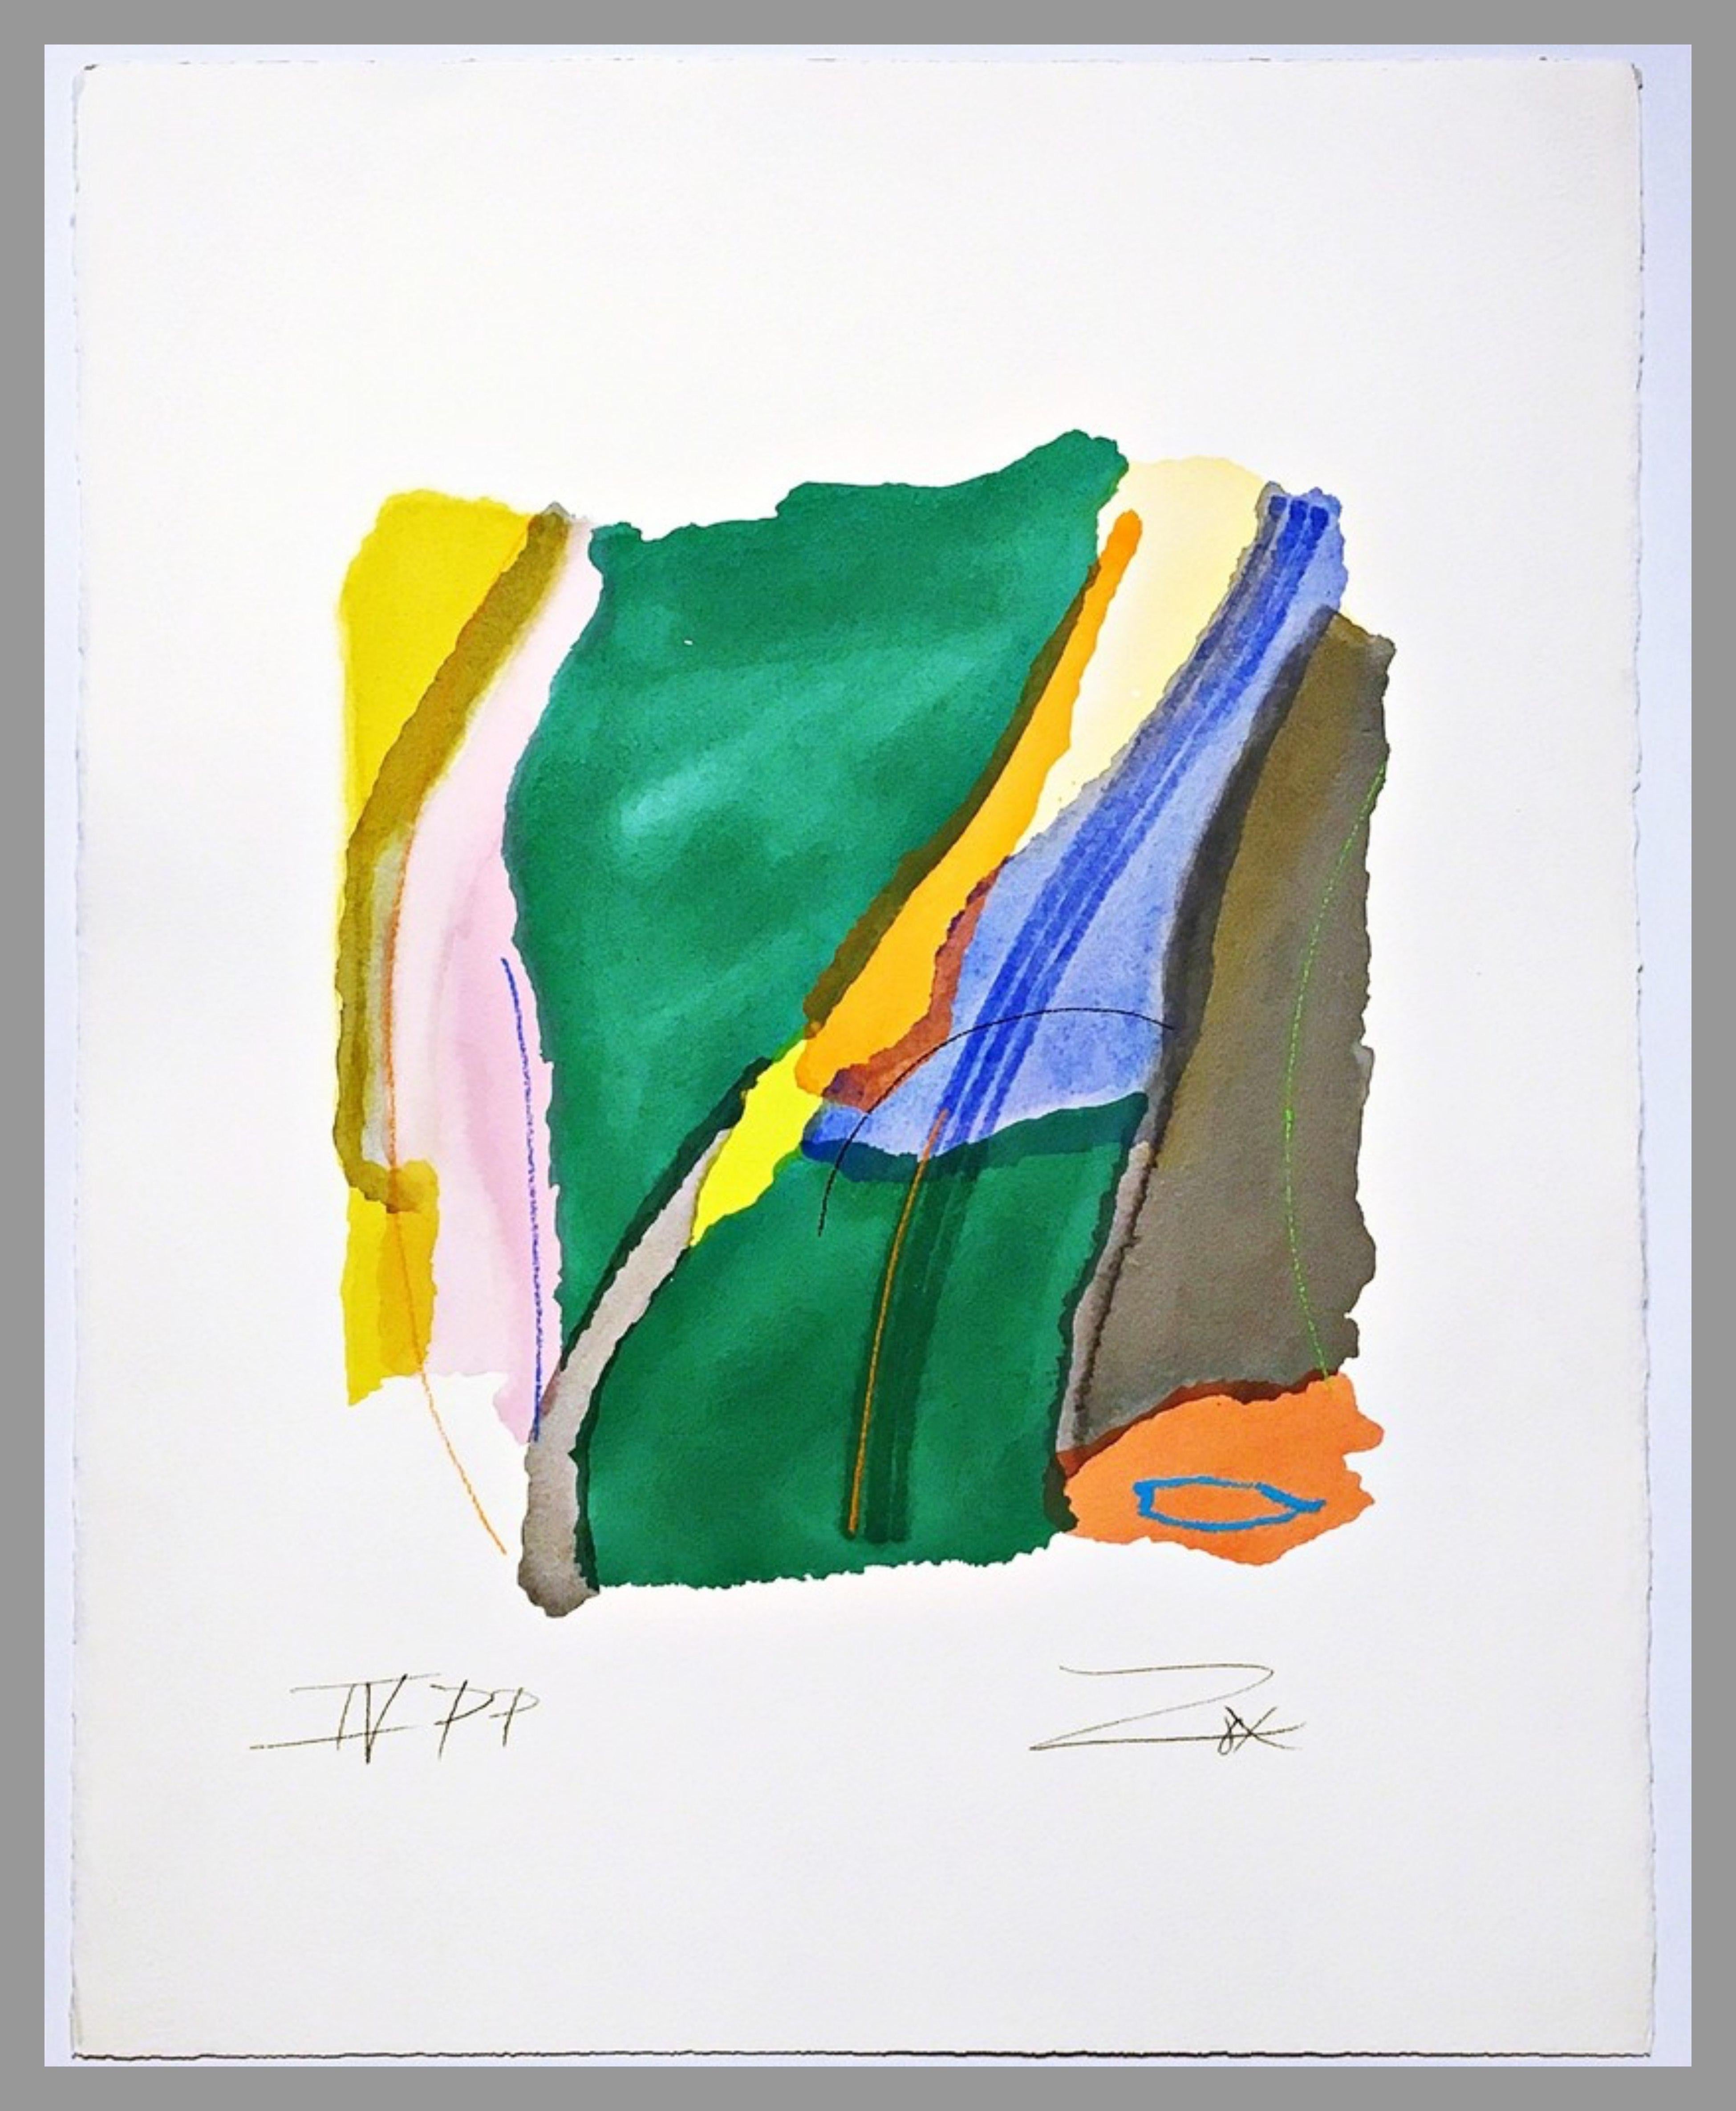 Larry Zox
Untitled IV, ca. 1979
Pochoir on Arches Paper with Deckled Edges. Hand signed and annotated Printers Proof in pencil on the lower front.
28 1/2 × 22 1/2 inches
Unframed
This beautiful Larry Zox pochoir on Arches paper with deckled edges a